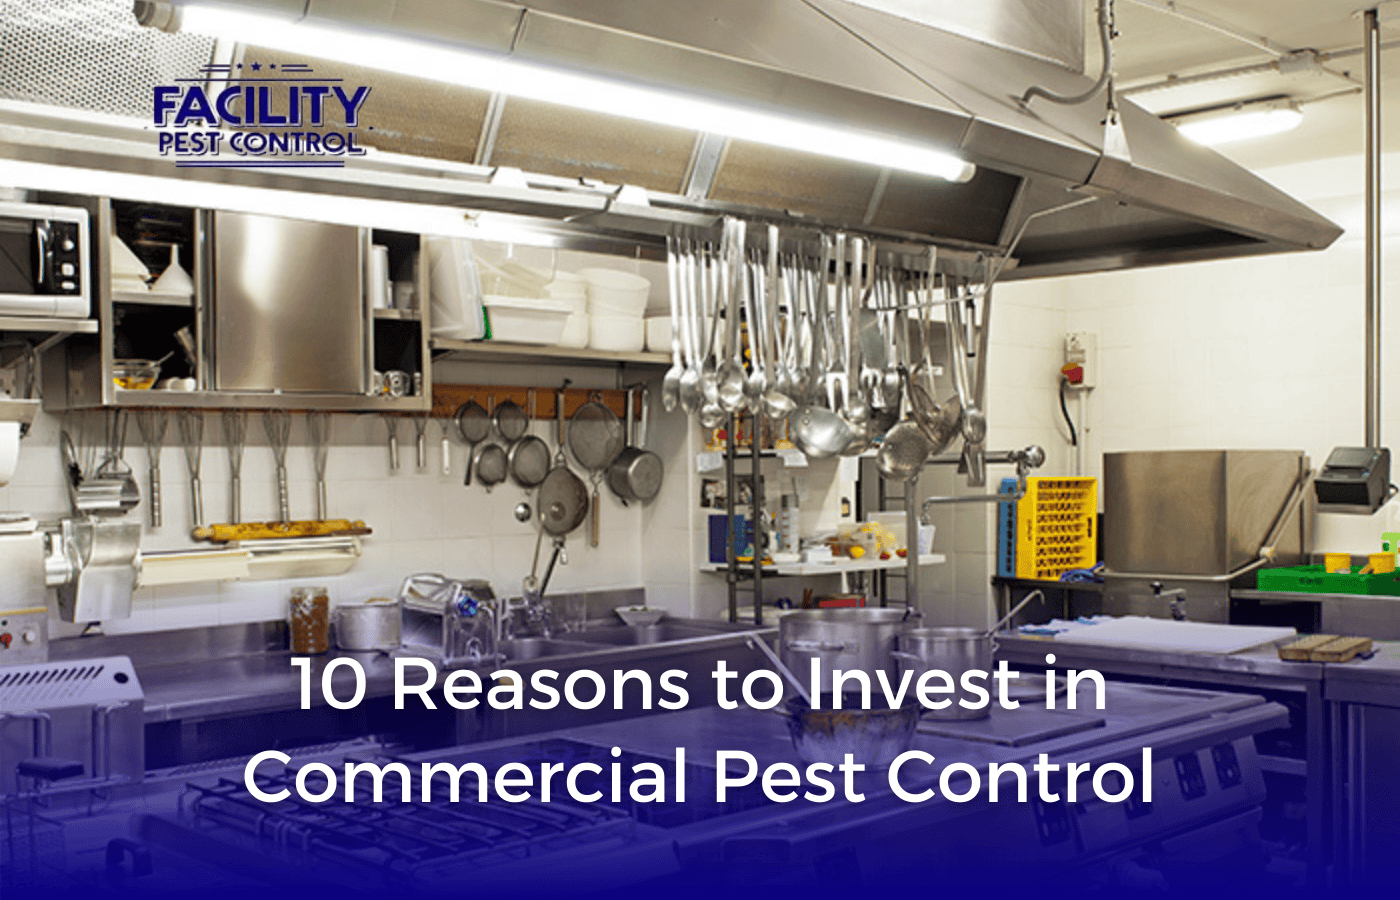 10 Reasons to Invest in Commercial Pest Control